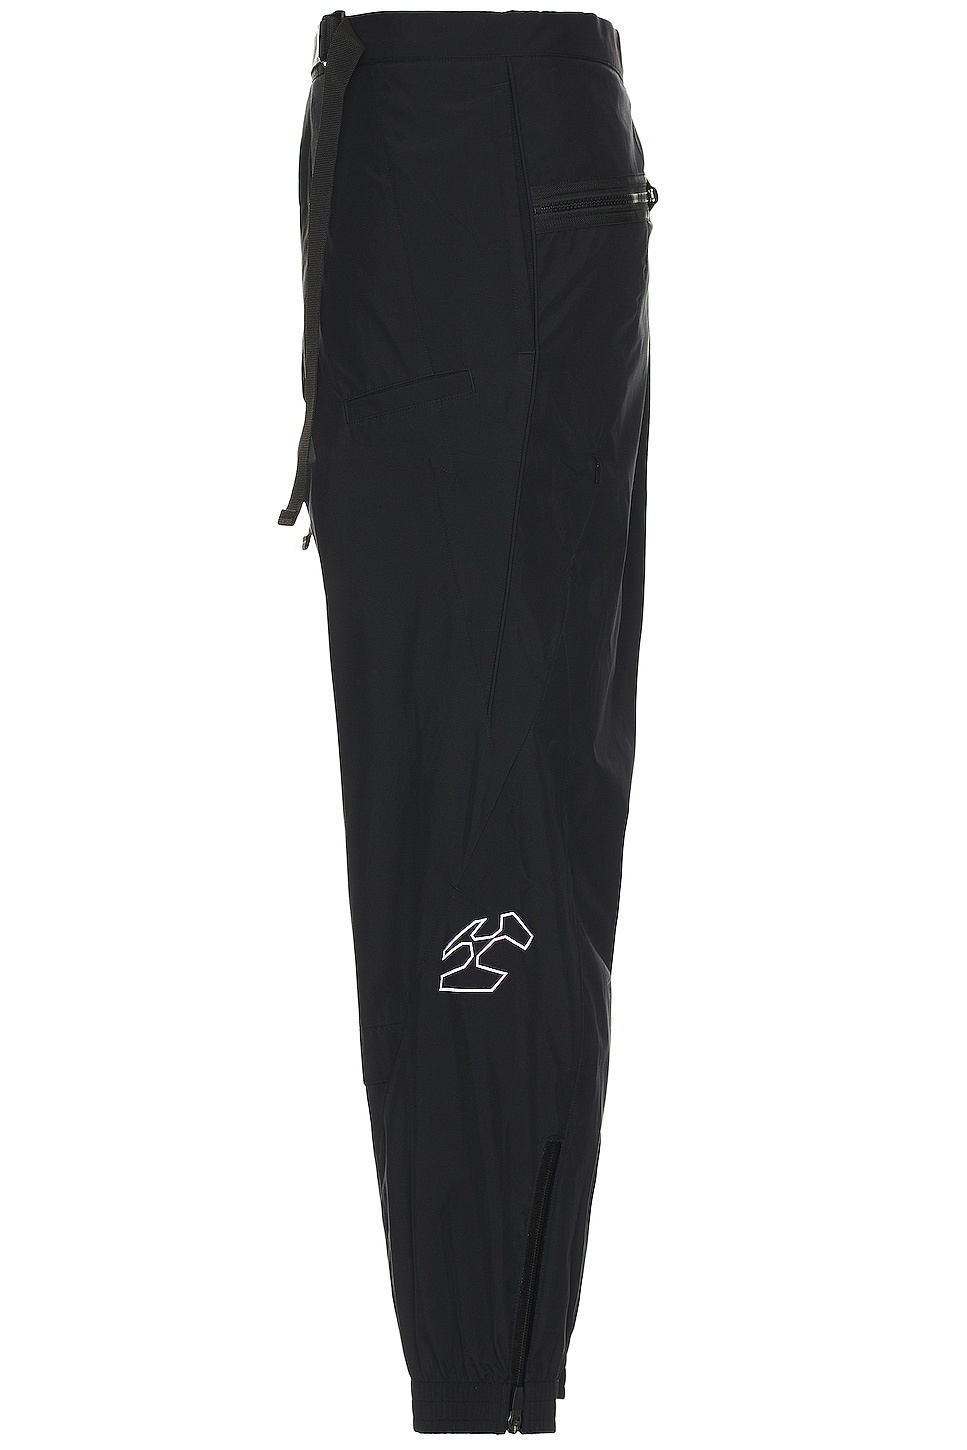 P53-ws 2l Gore-tex Windstopper Insulated Vent Pant - 3